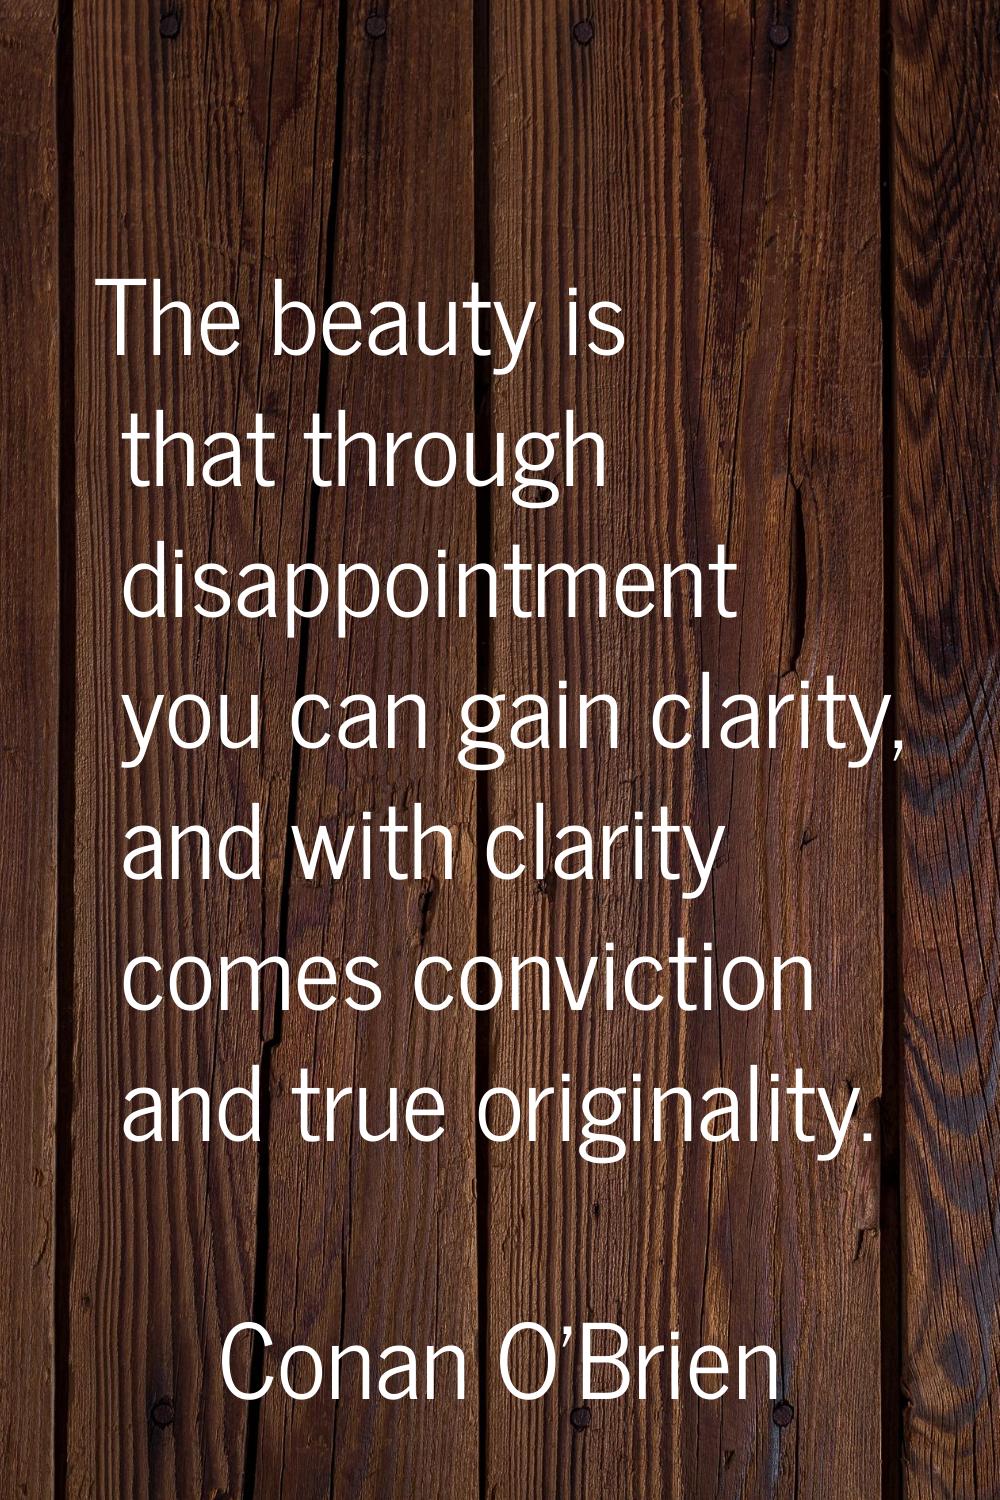 The beauty is that through disappointment you can gain clarity, and with clarity comes conviction a